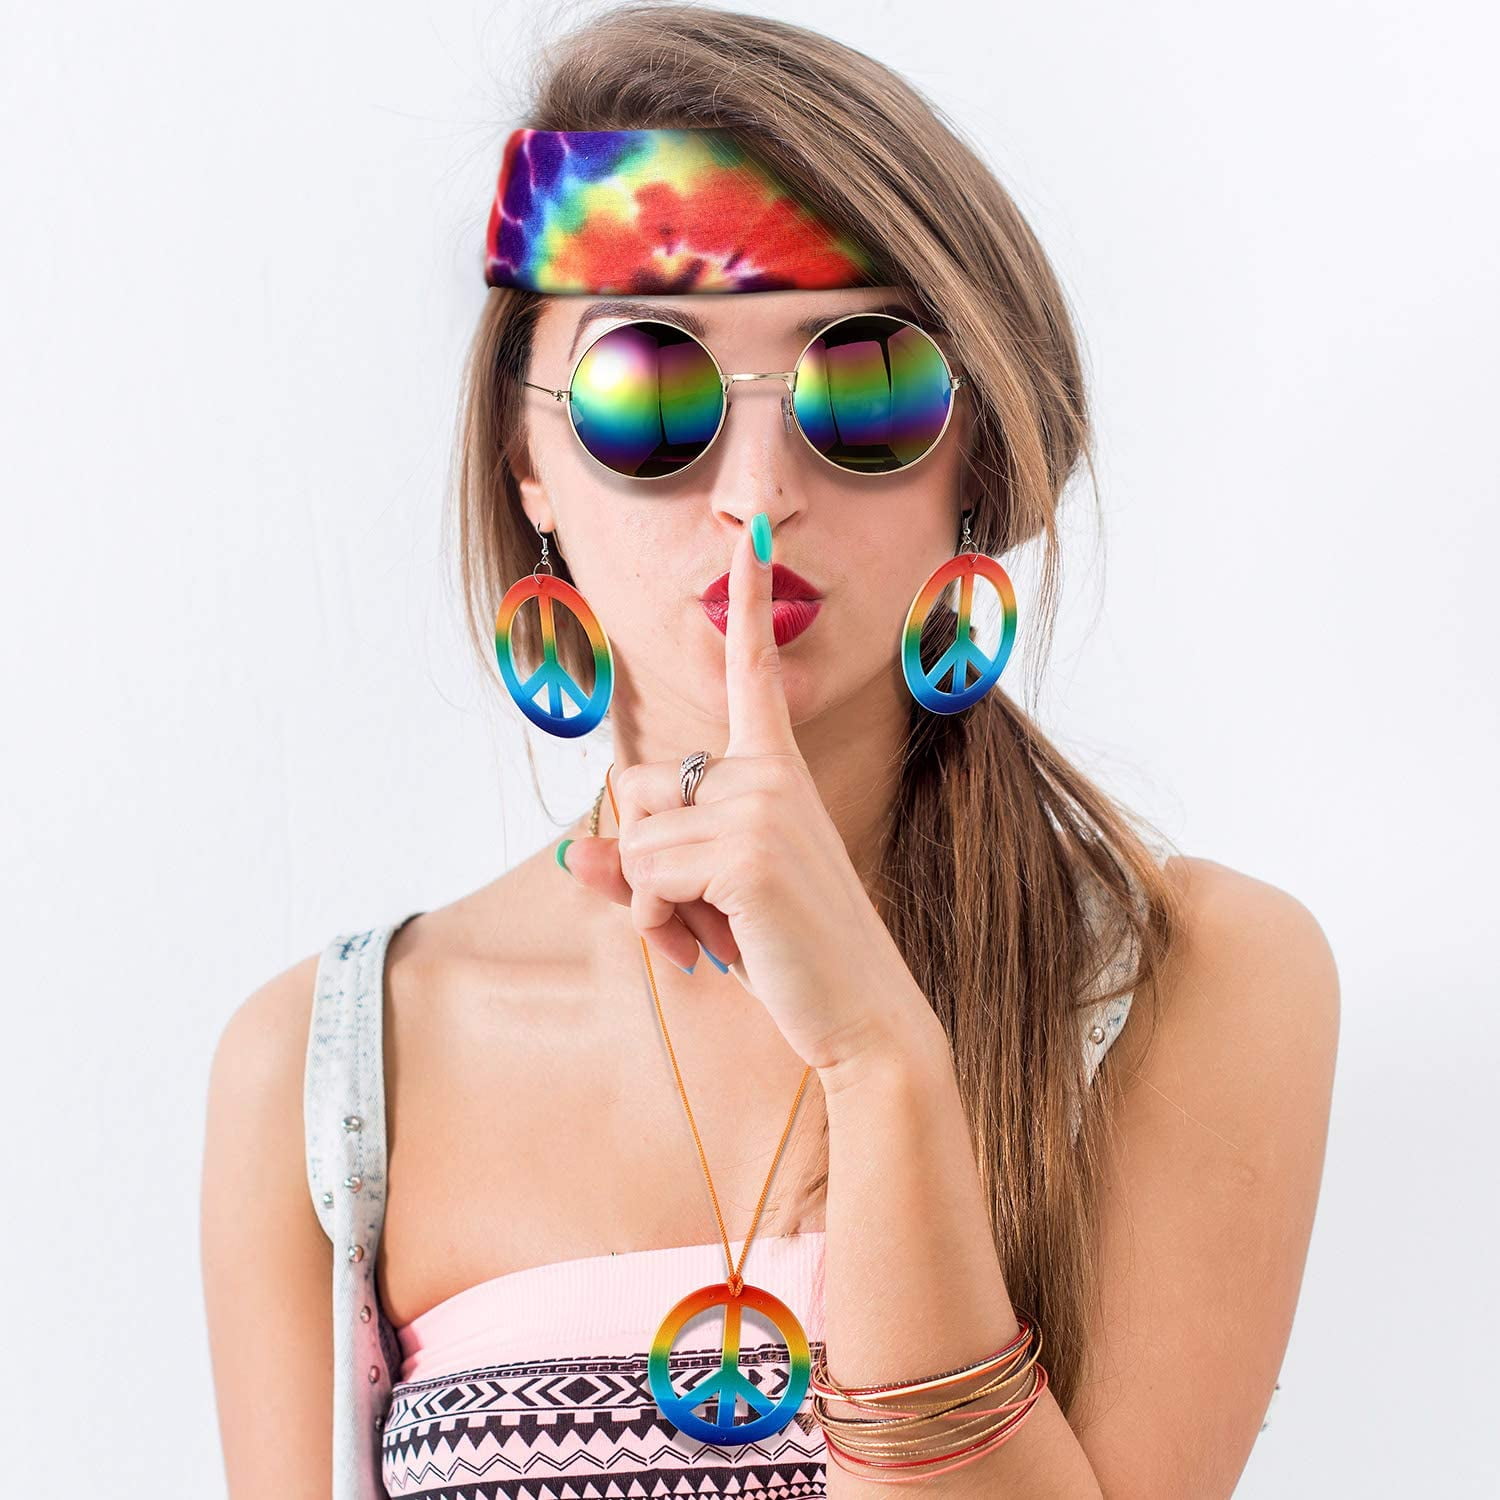 4 Pieces Accessories Hippie Costume Set Sunglasses Earrings and Headband for Women and Men Including Peace Sign Necklace 